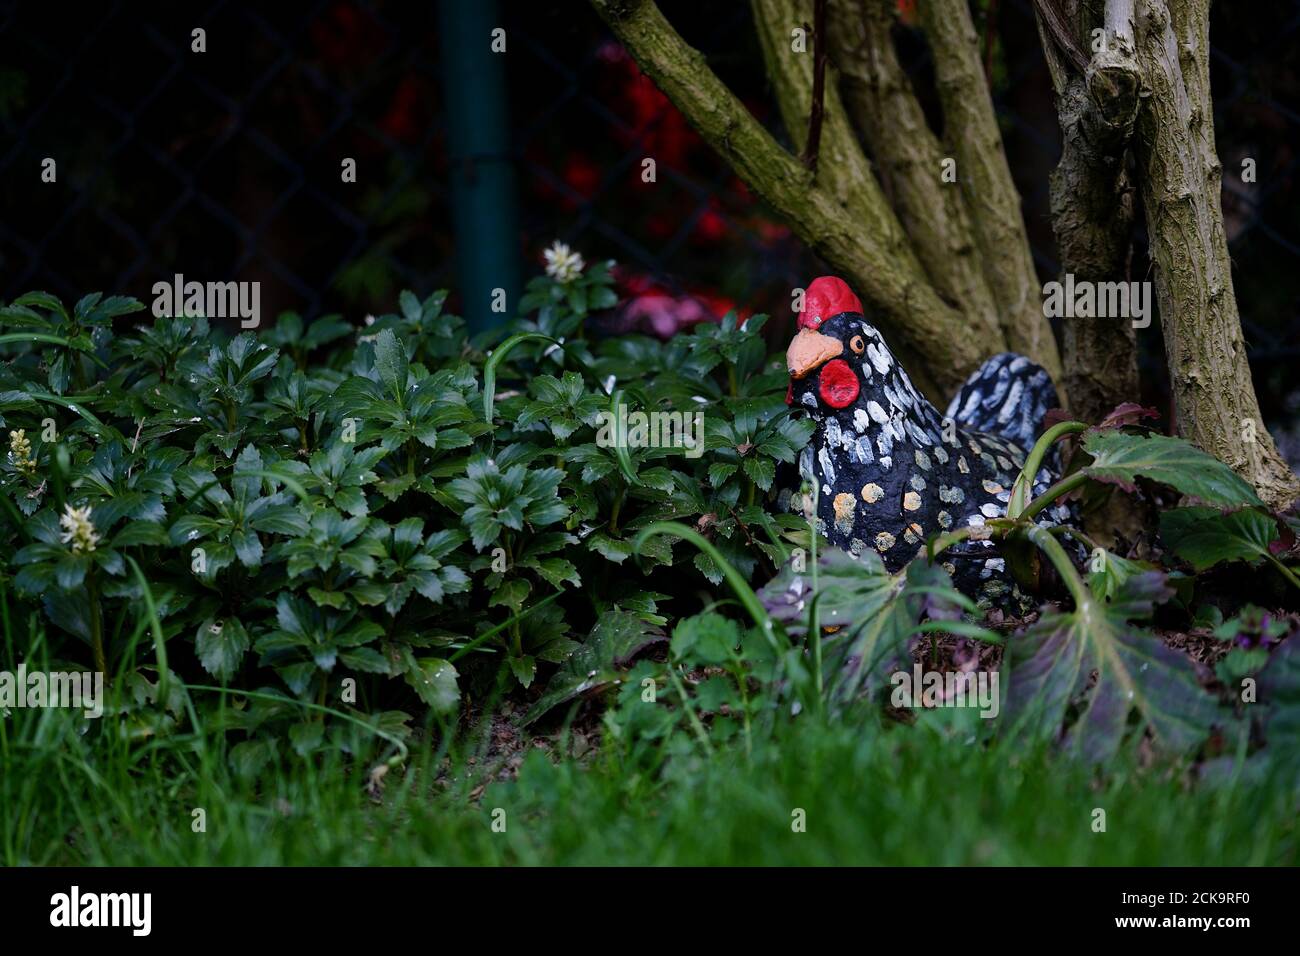 Garden decoration in the shape of a colorful hen in Japanese pachysandra leaves Stock Photo